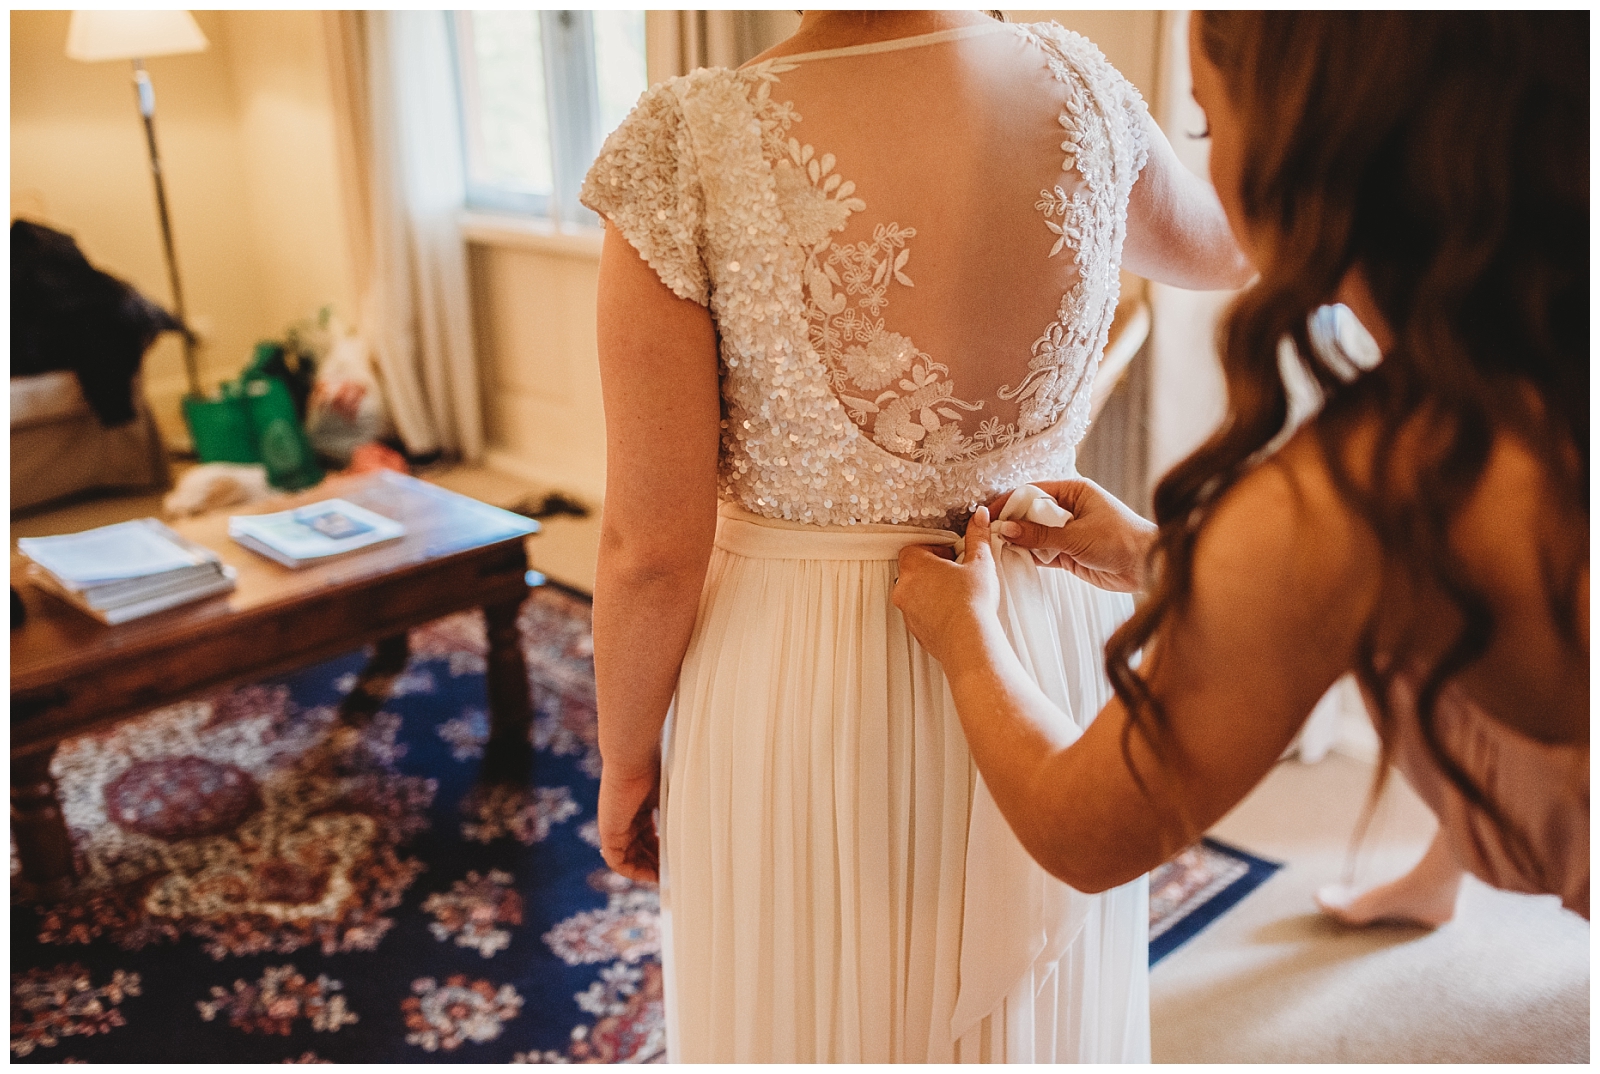 Bridesmaids hands tying ribbon on back of brides lace bodice dress.